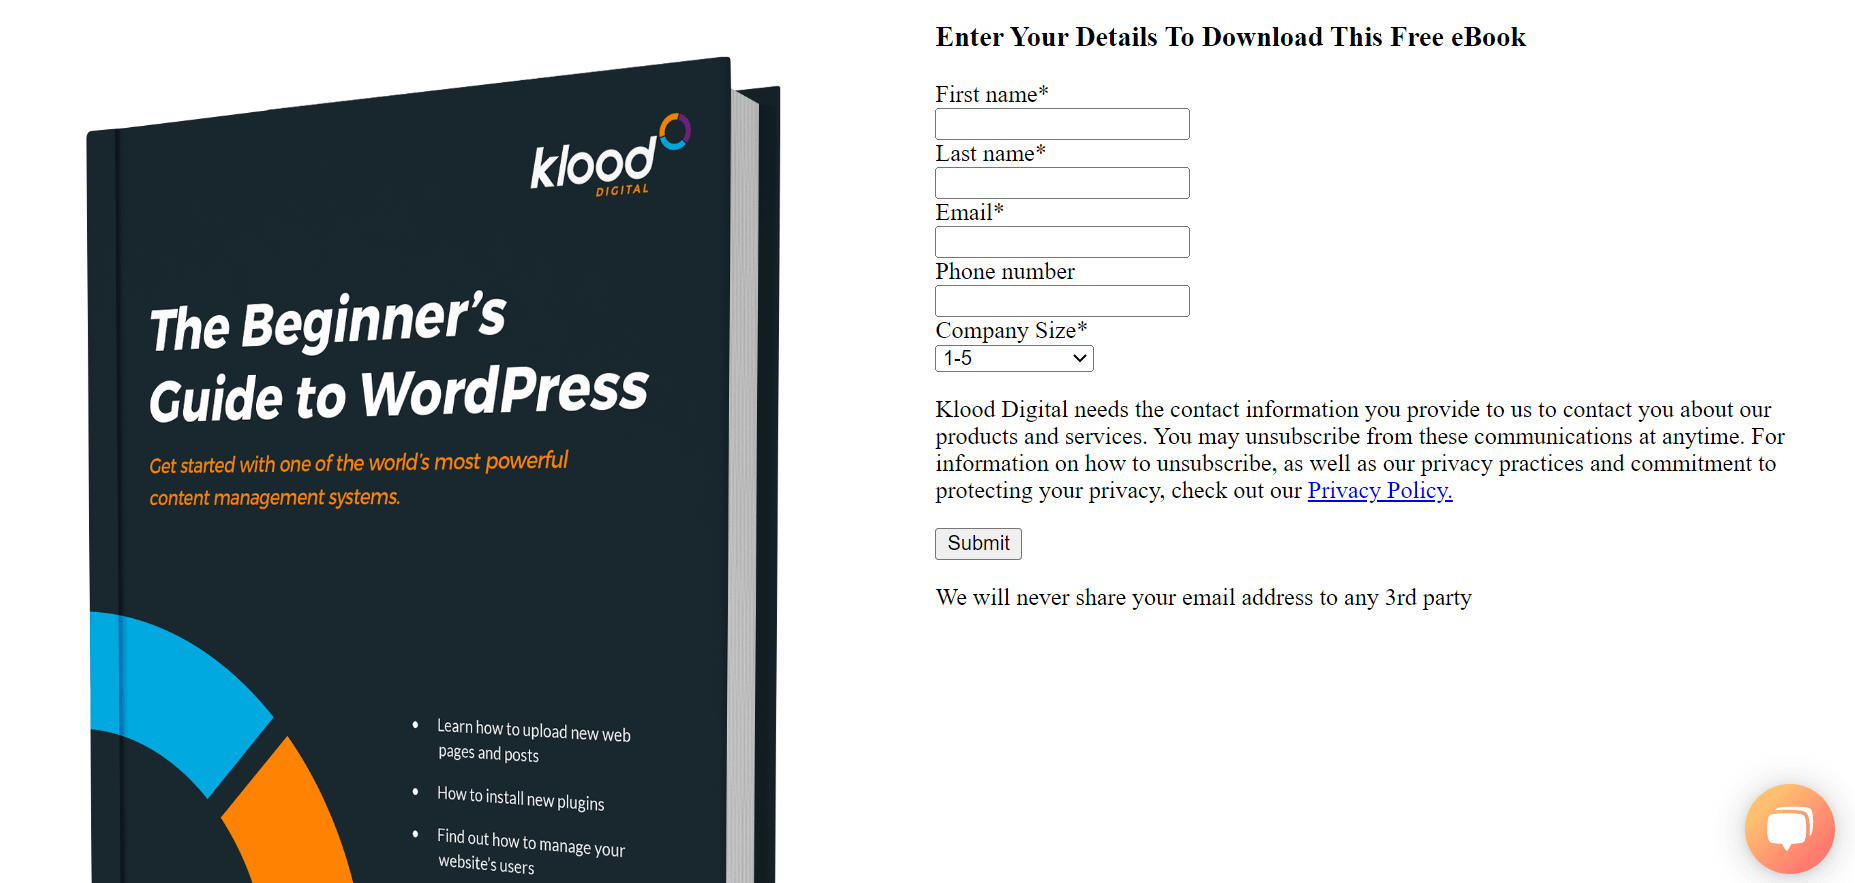 Klood offers gated content in the form of an ebook in exchange for personal info.